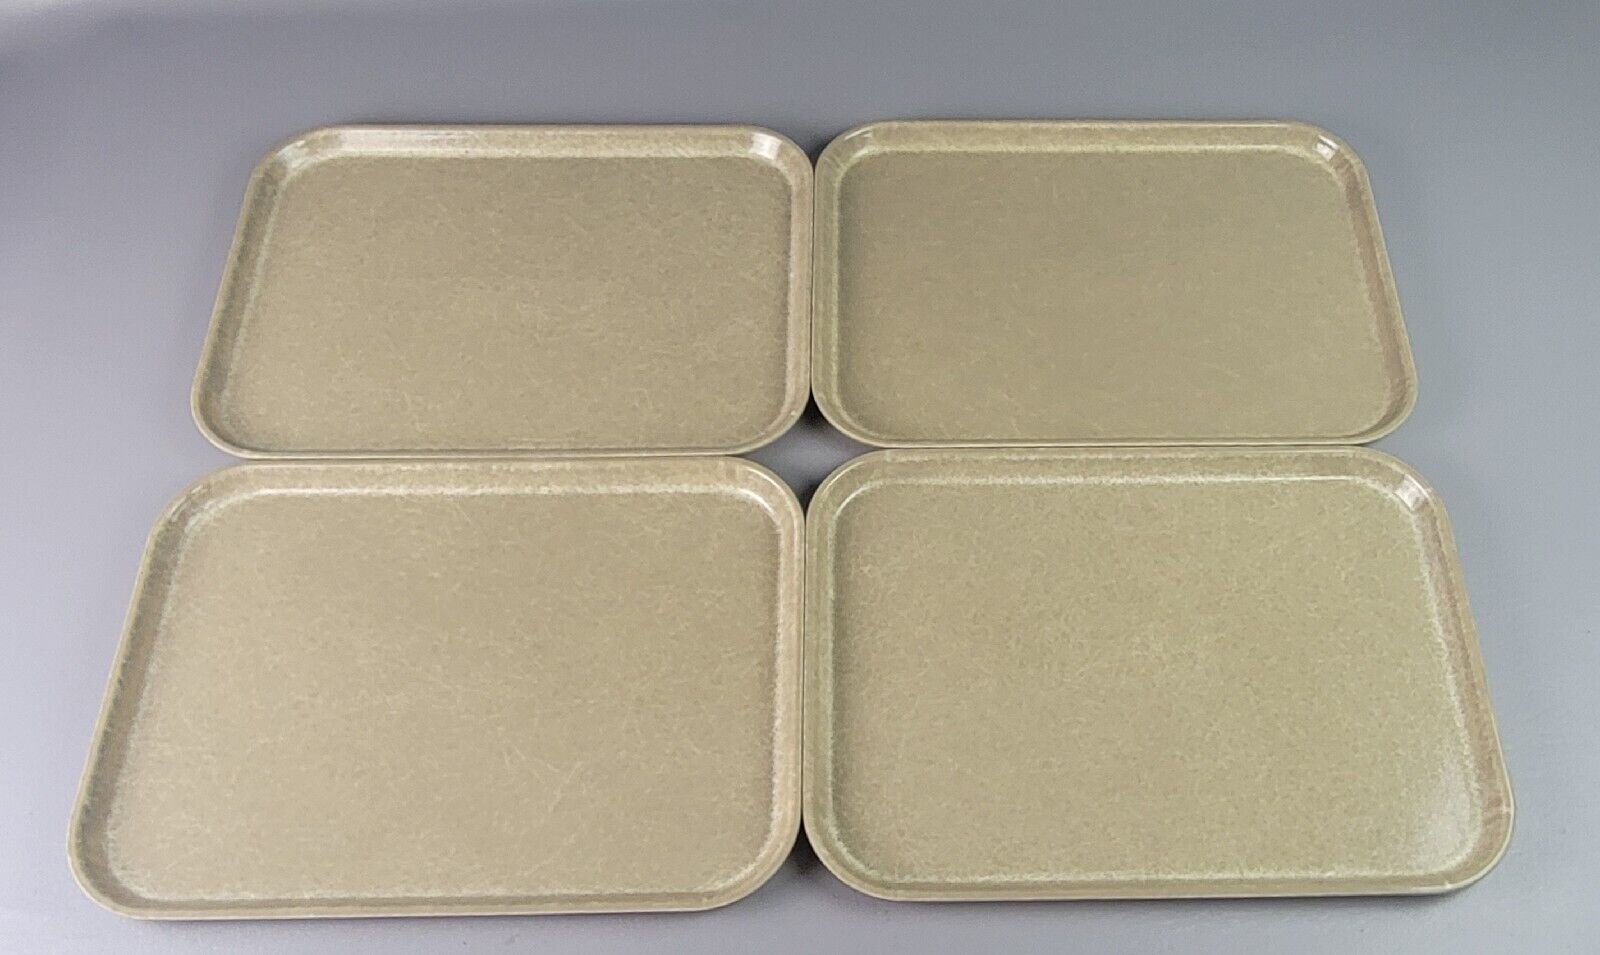 4 Vintage Cambro 15-3 Camtray Beige Cafeteria Lunch Tray 16x12 NSF